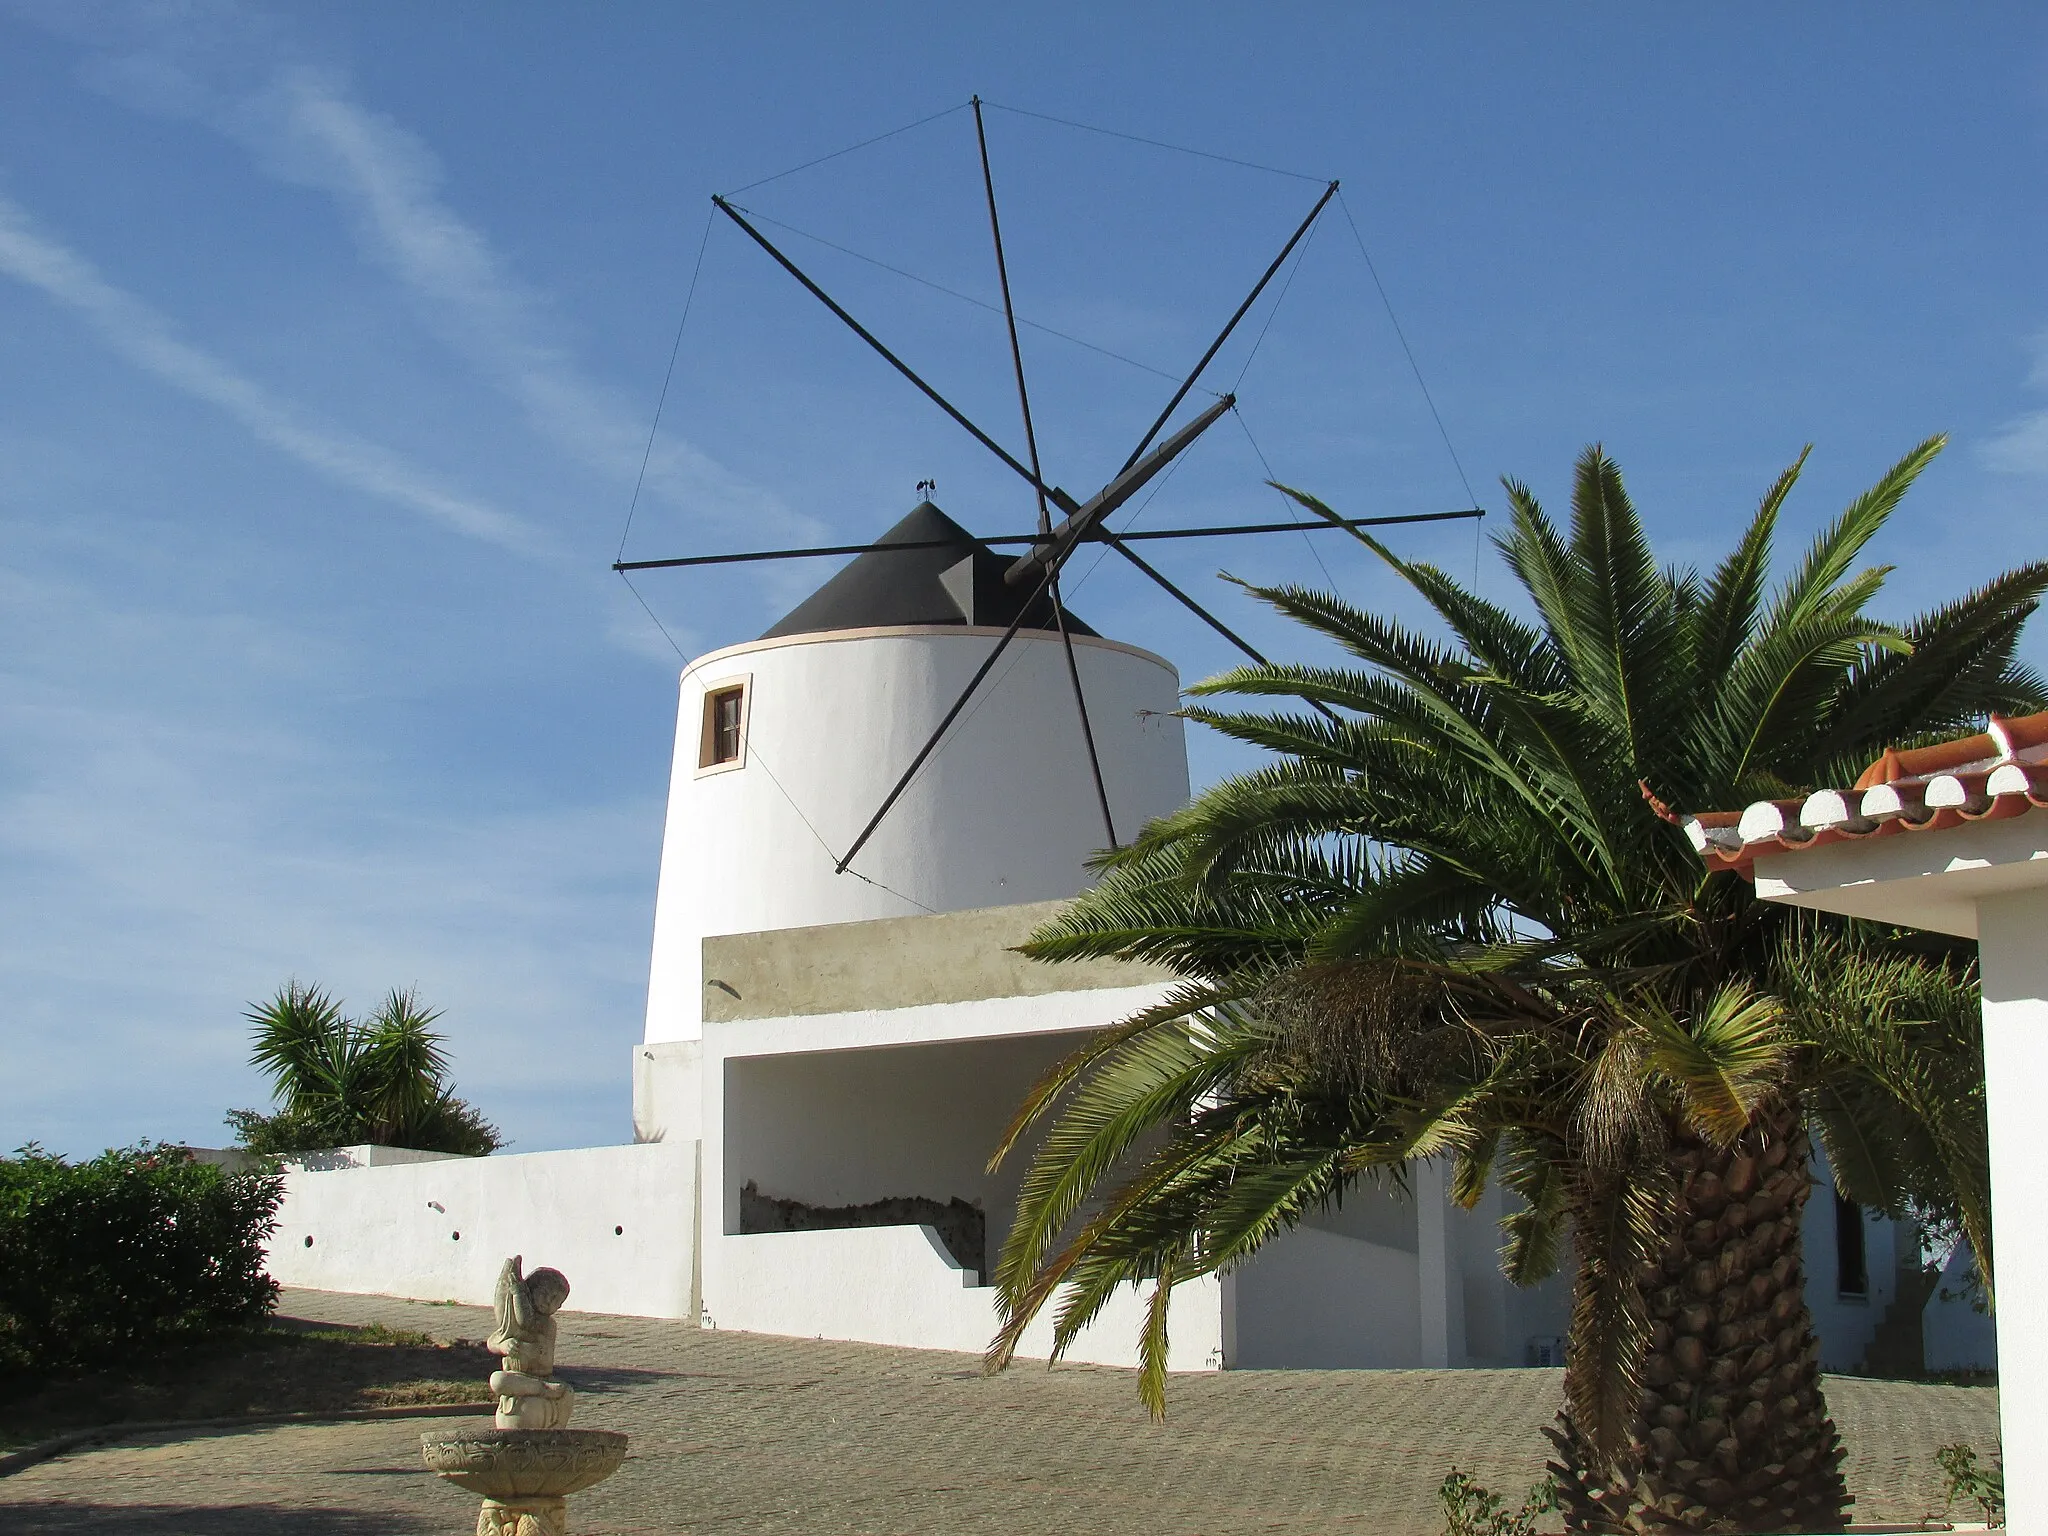 Photo showing: A restored windmill located on Travessa do Moinho, Boliqueime, Algarve, Portugal.